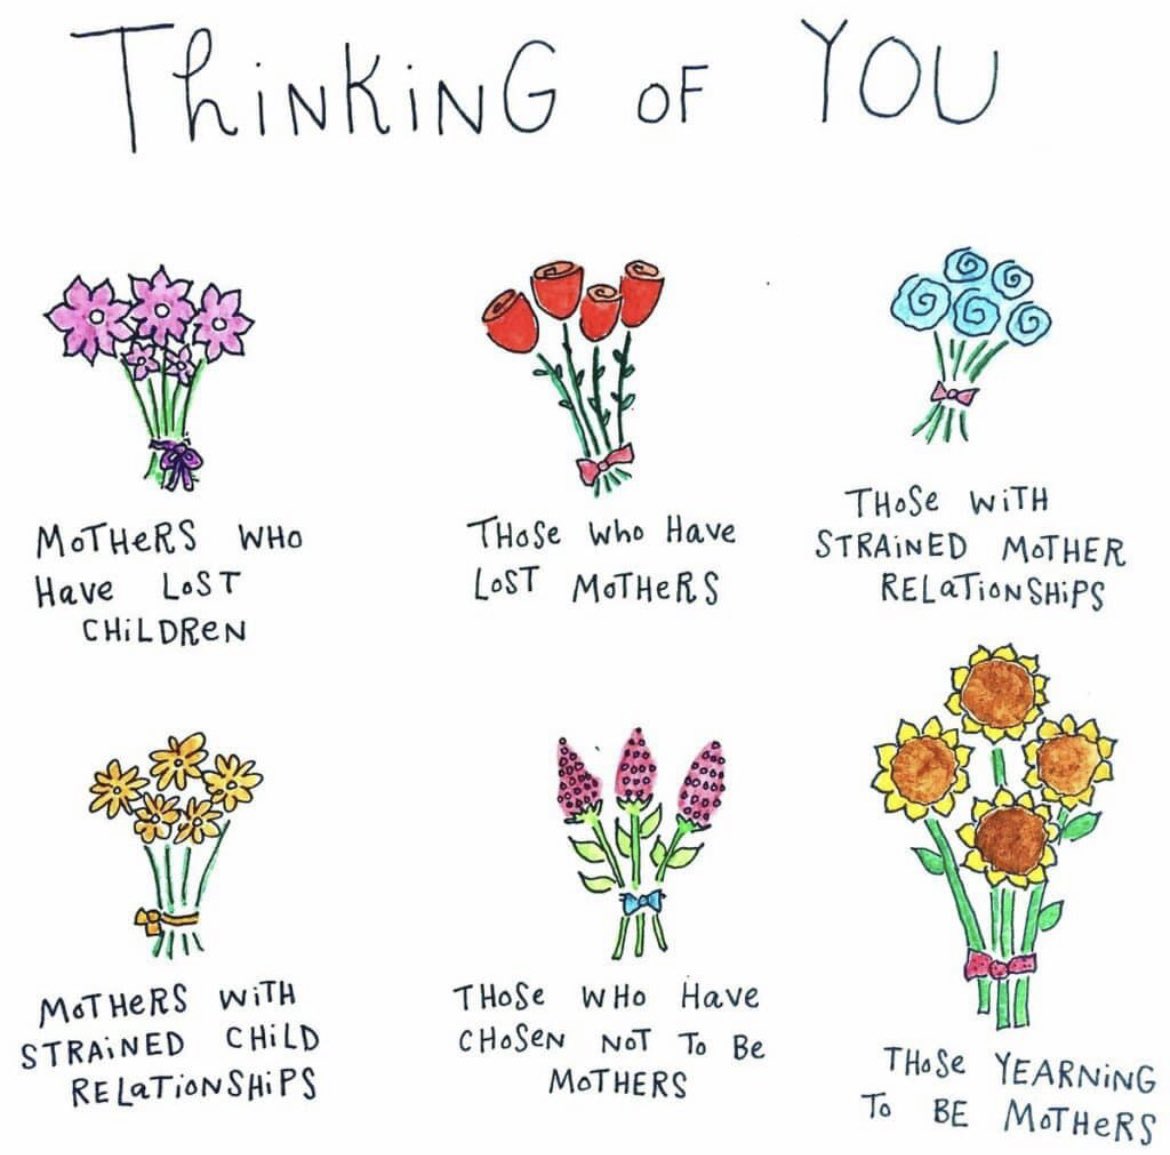 💜On Mothers Day, thinking of all 💜Especially our staff mums working on Mother’s Day helping new mums #ThankyouForAllYouDo @TeamMidwife @BHRUT_NHS @BHRUT_MA